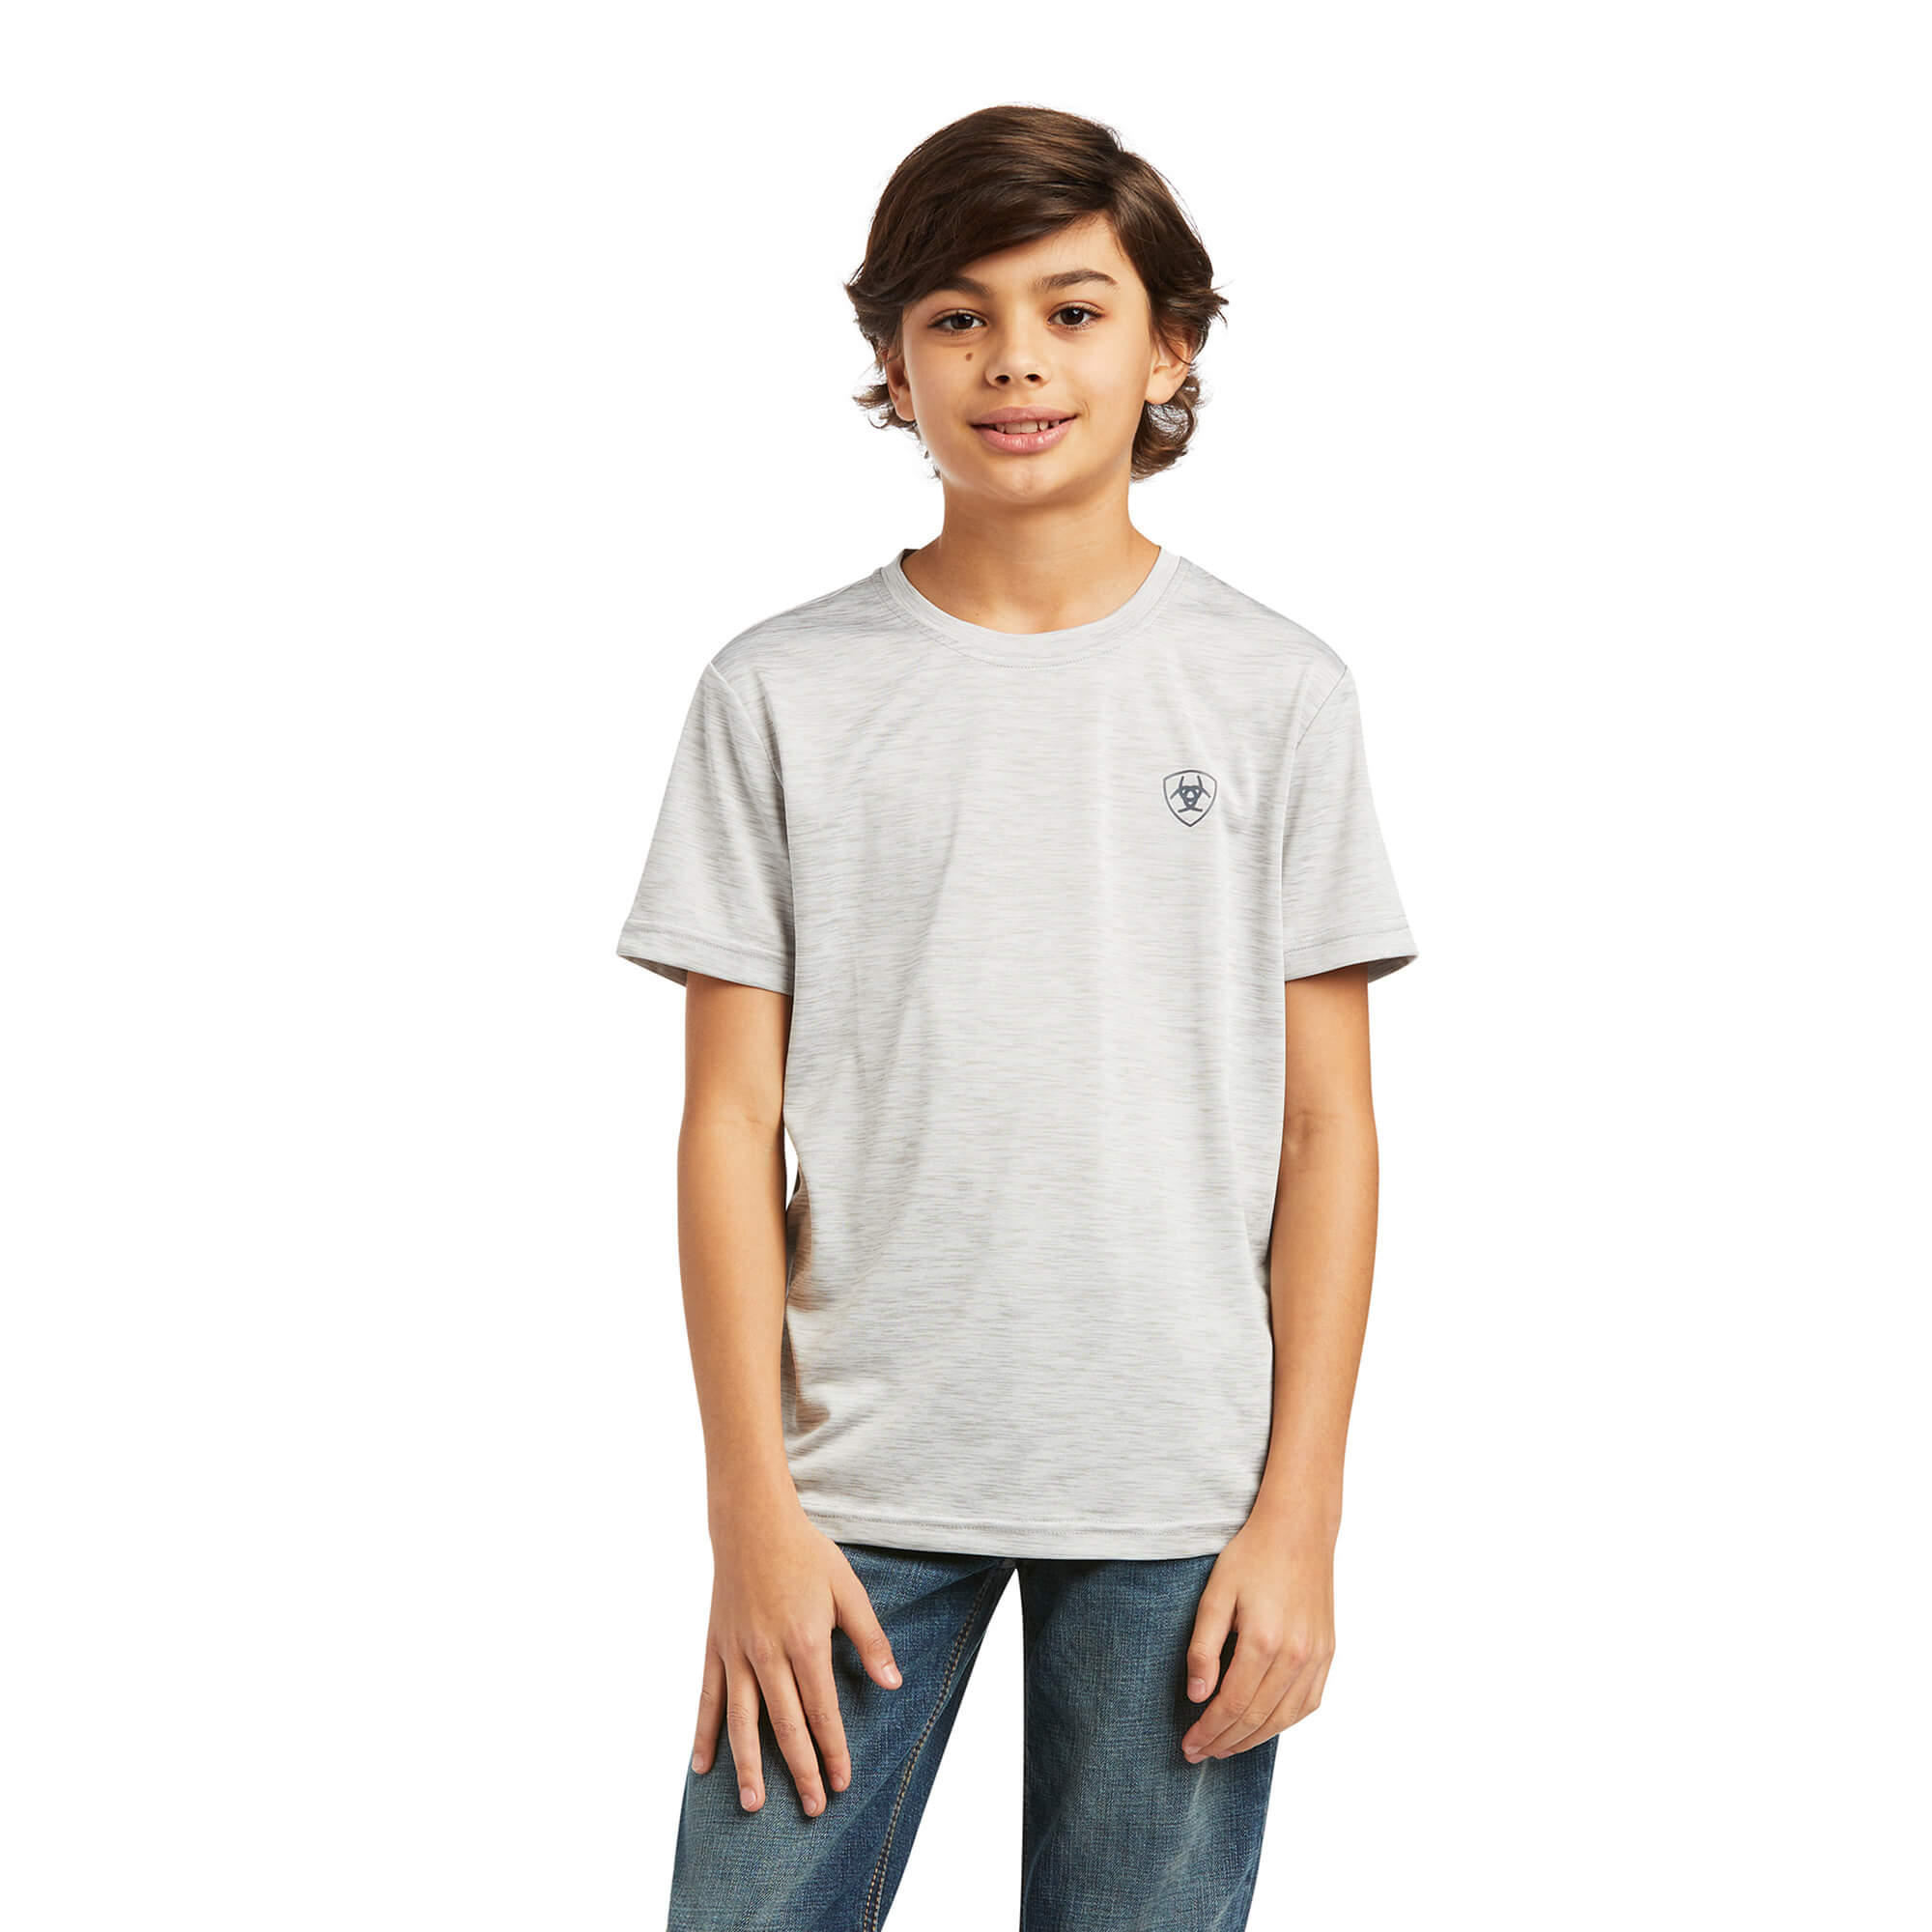 Ariat Boys Charger Shield T-Shirt